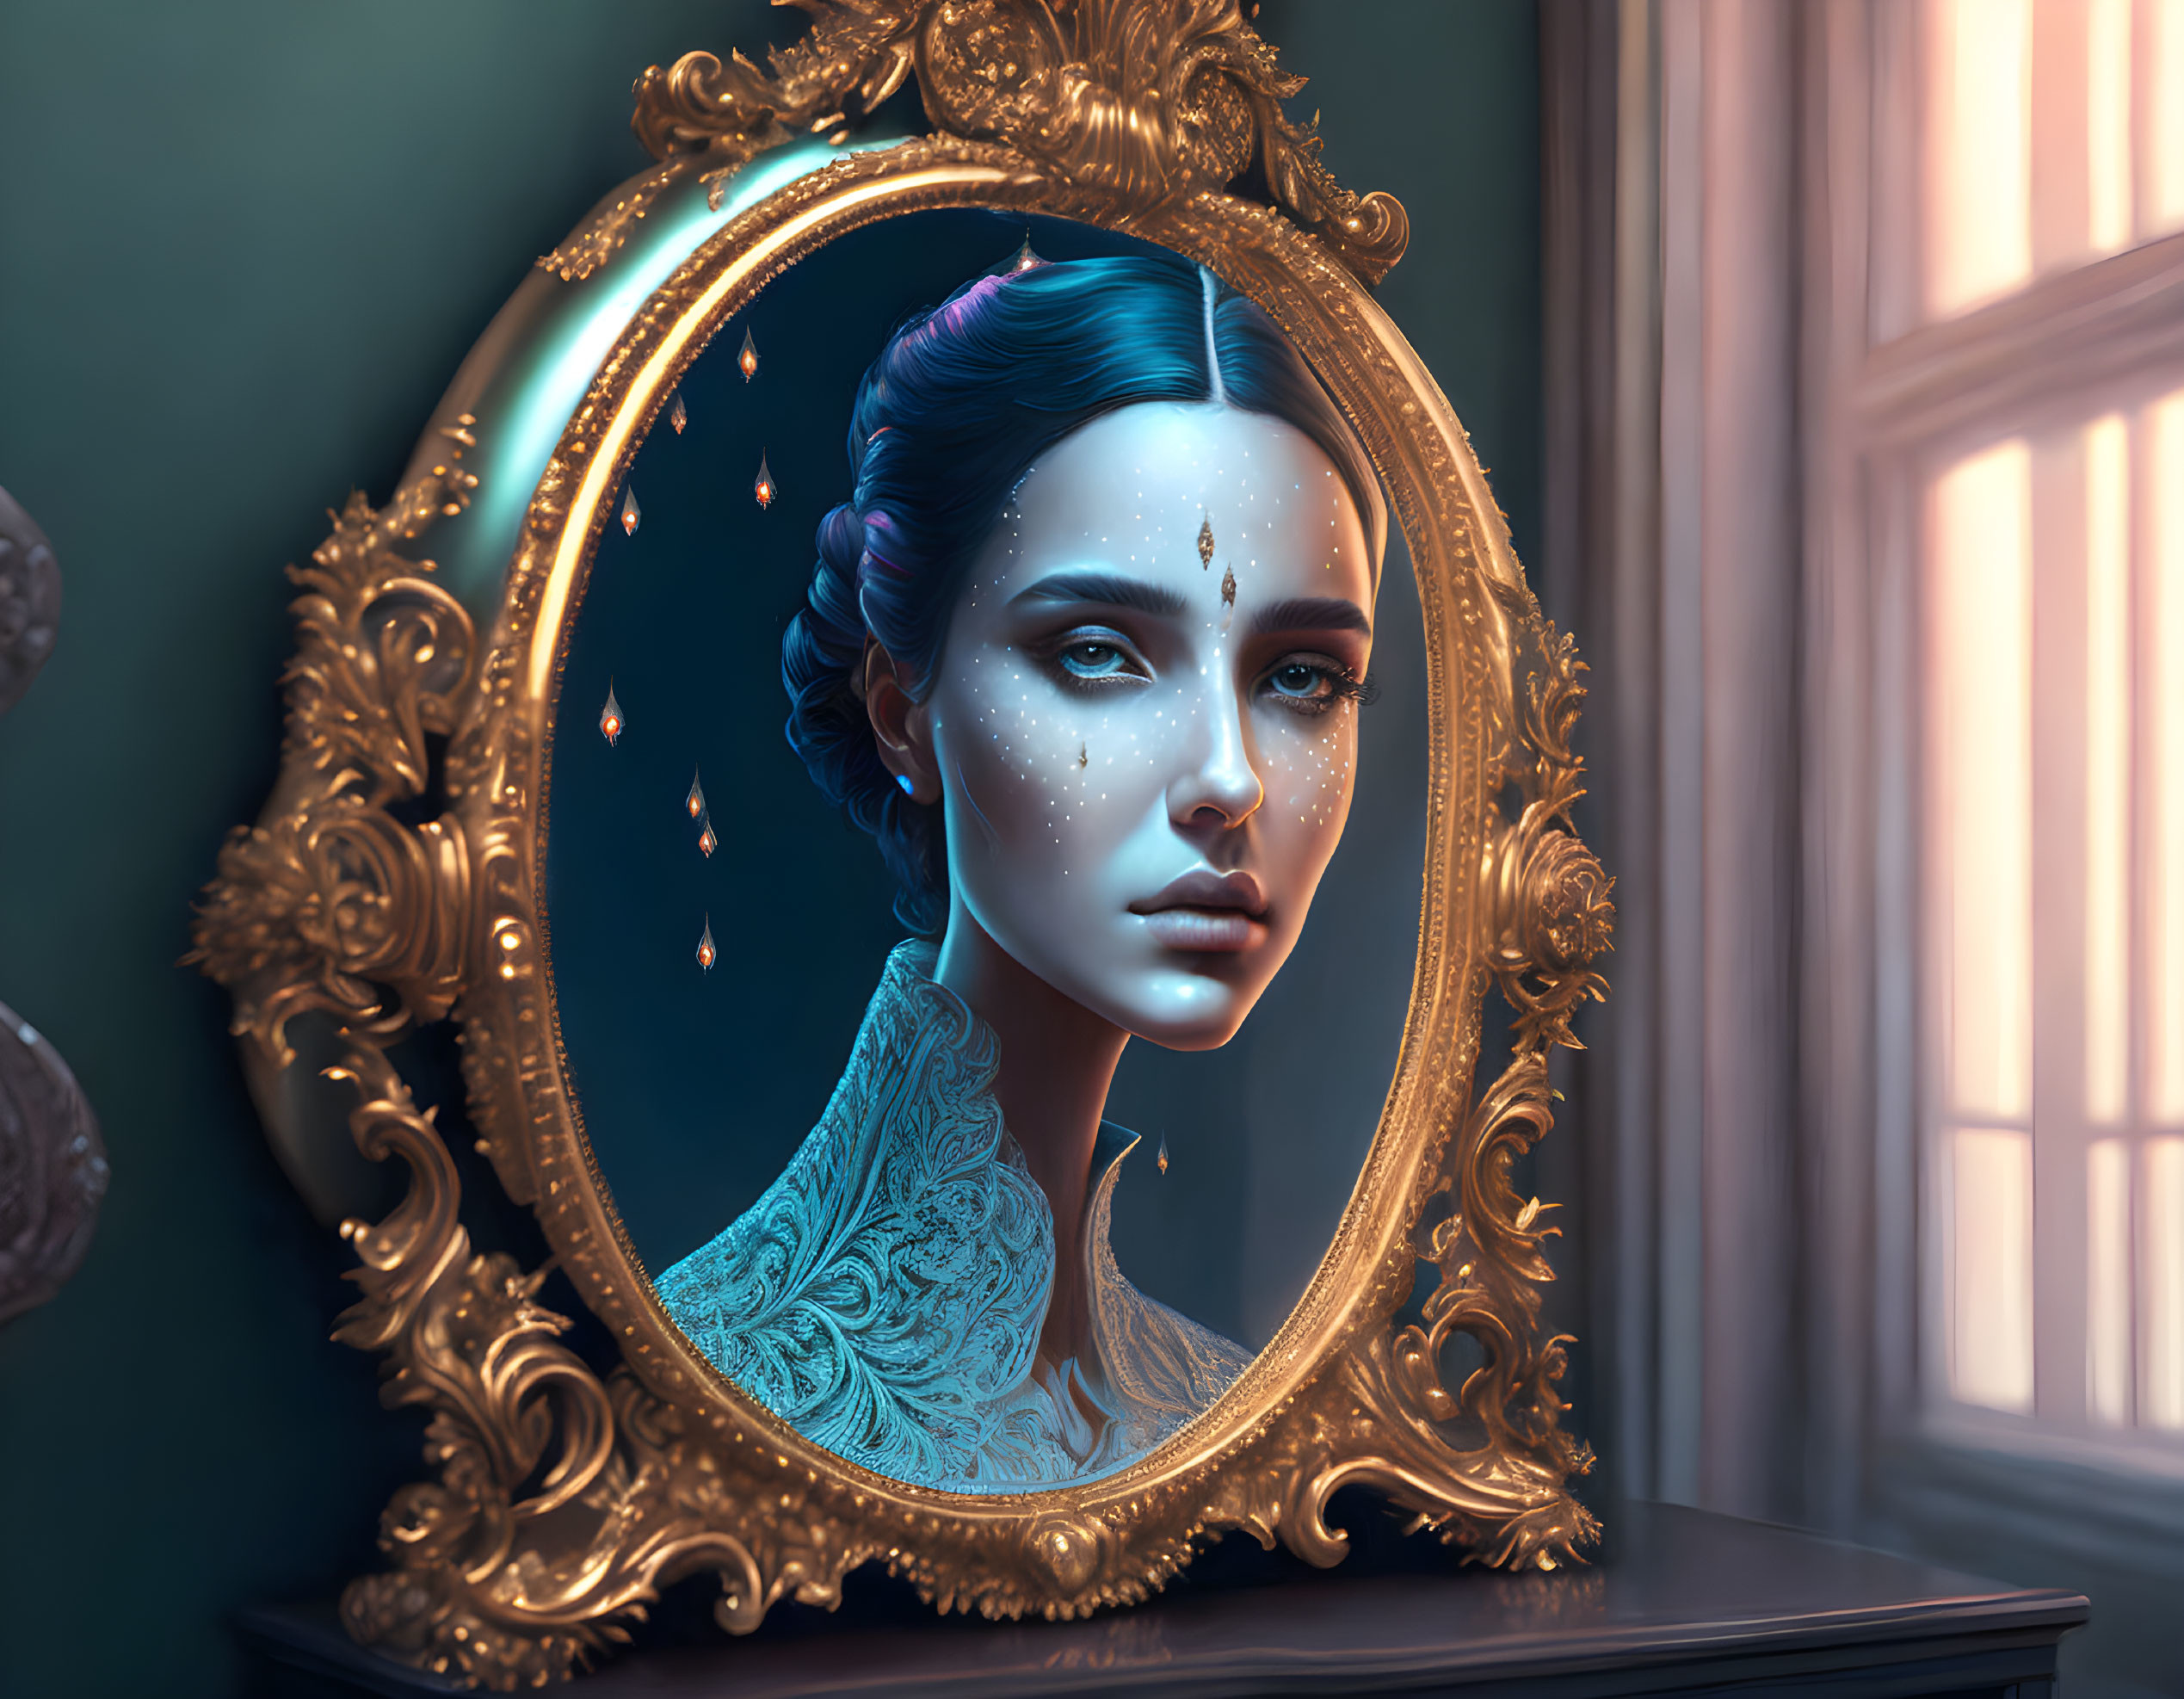 A ghostly female face caught in a mirror